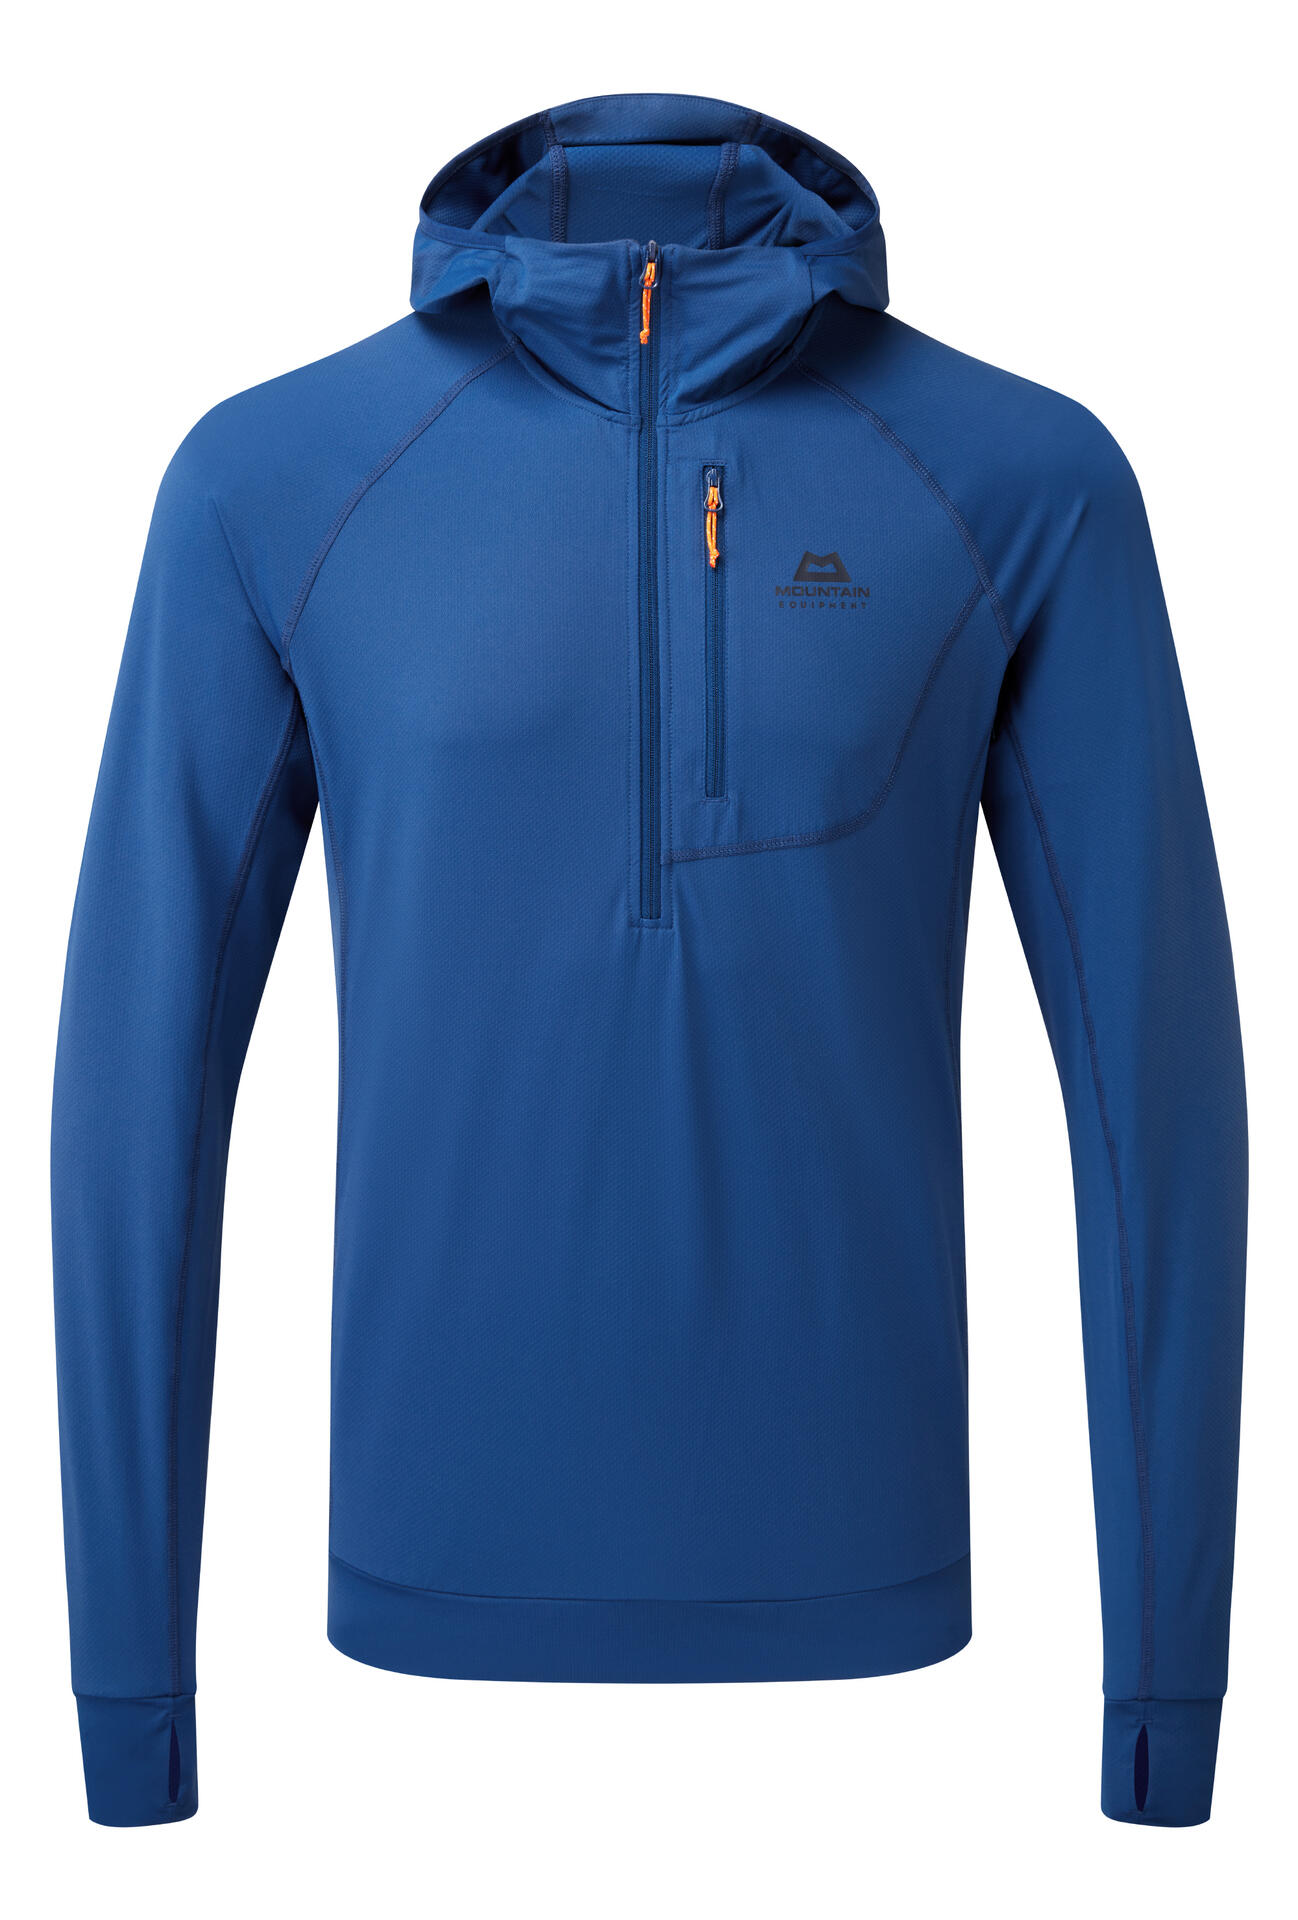 Mountain Equipment Aiguille Hooded Top Men'S Barva: admiral blue, Velikost: L